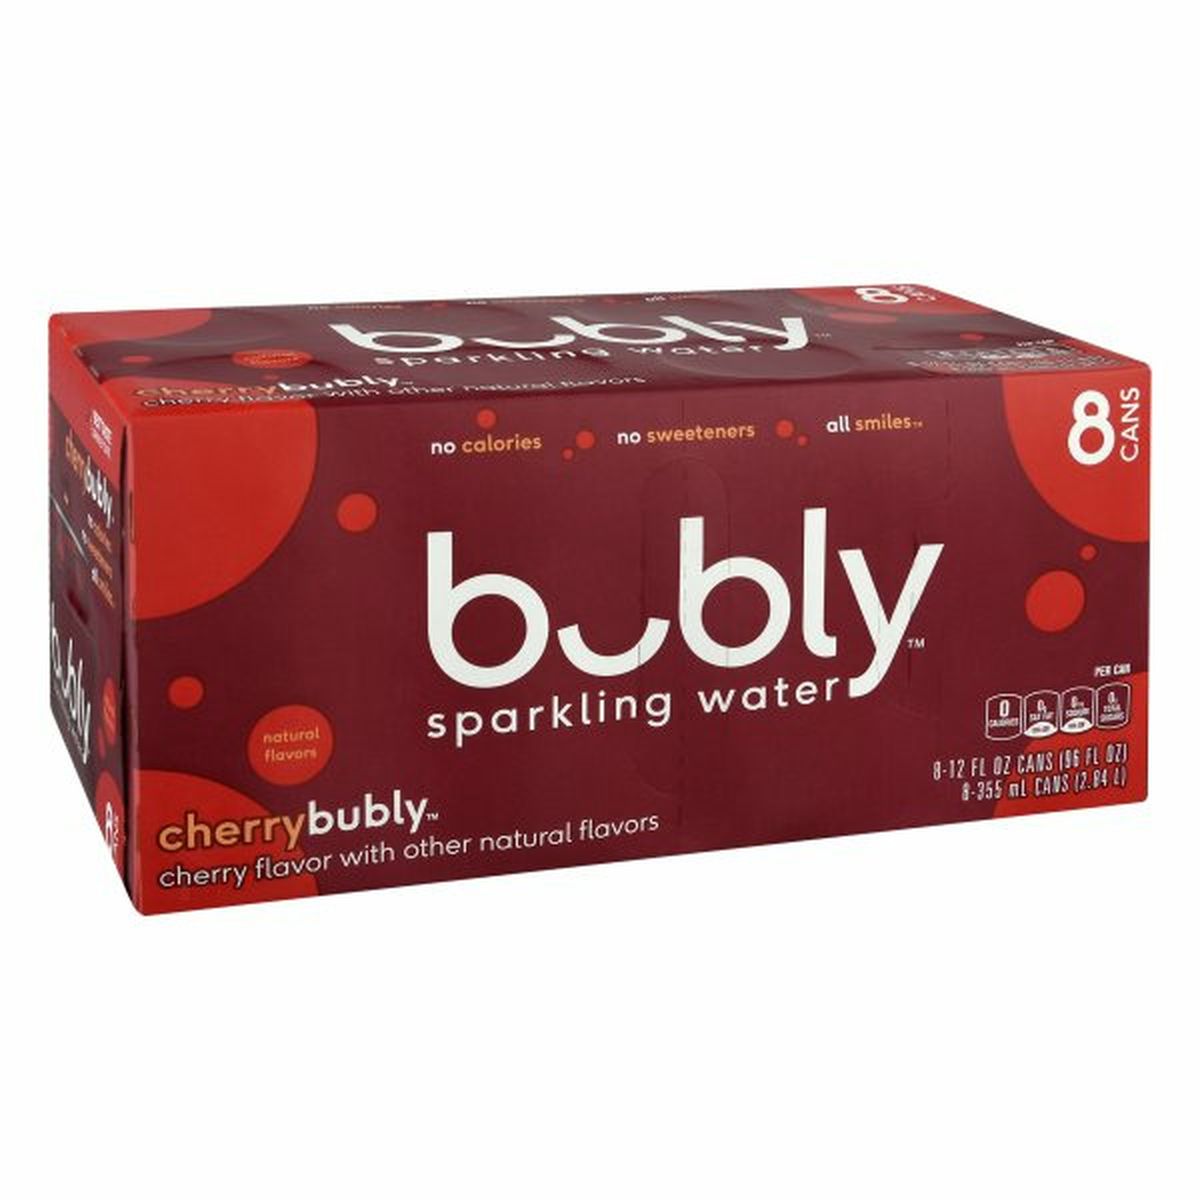 Calories in bubly Sparkling Water Sparkling Water, Cherry